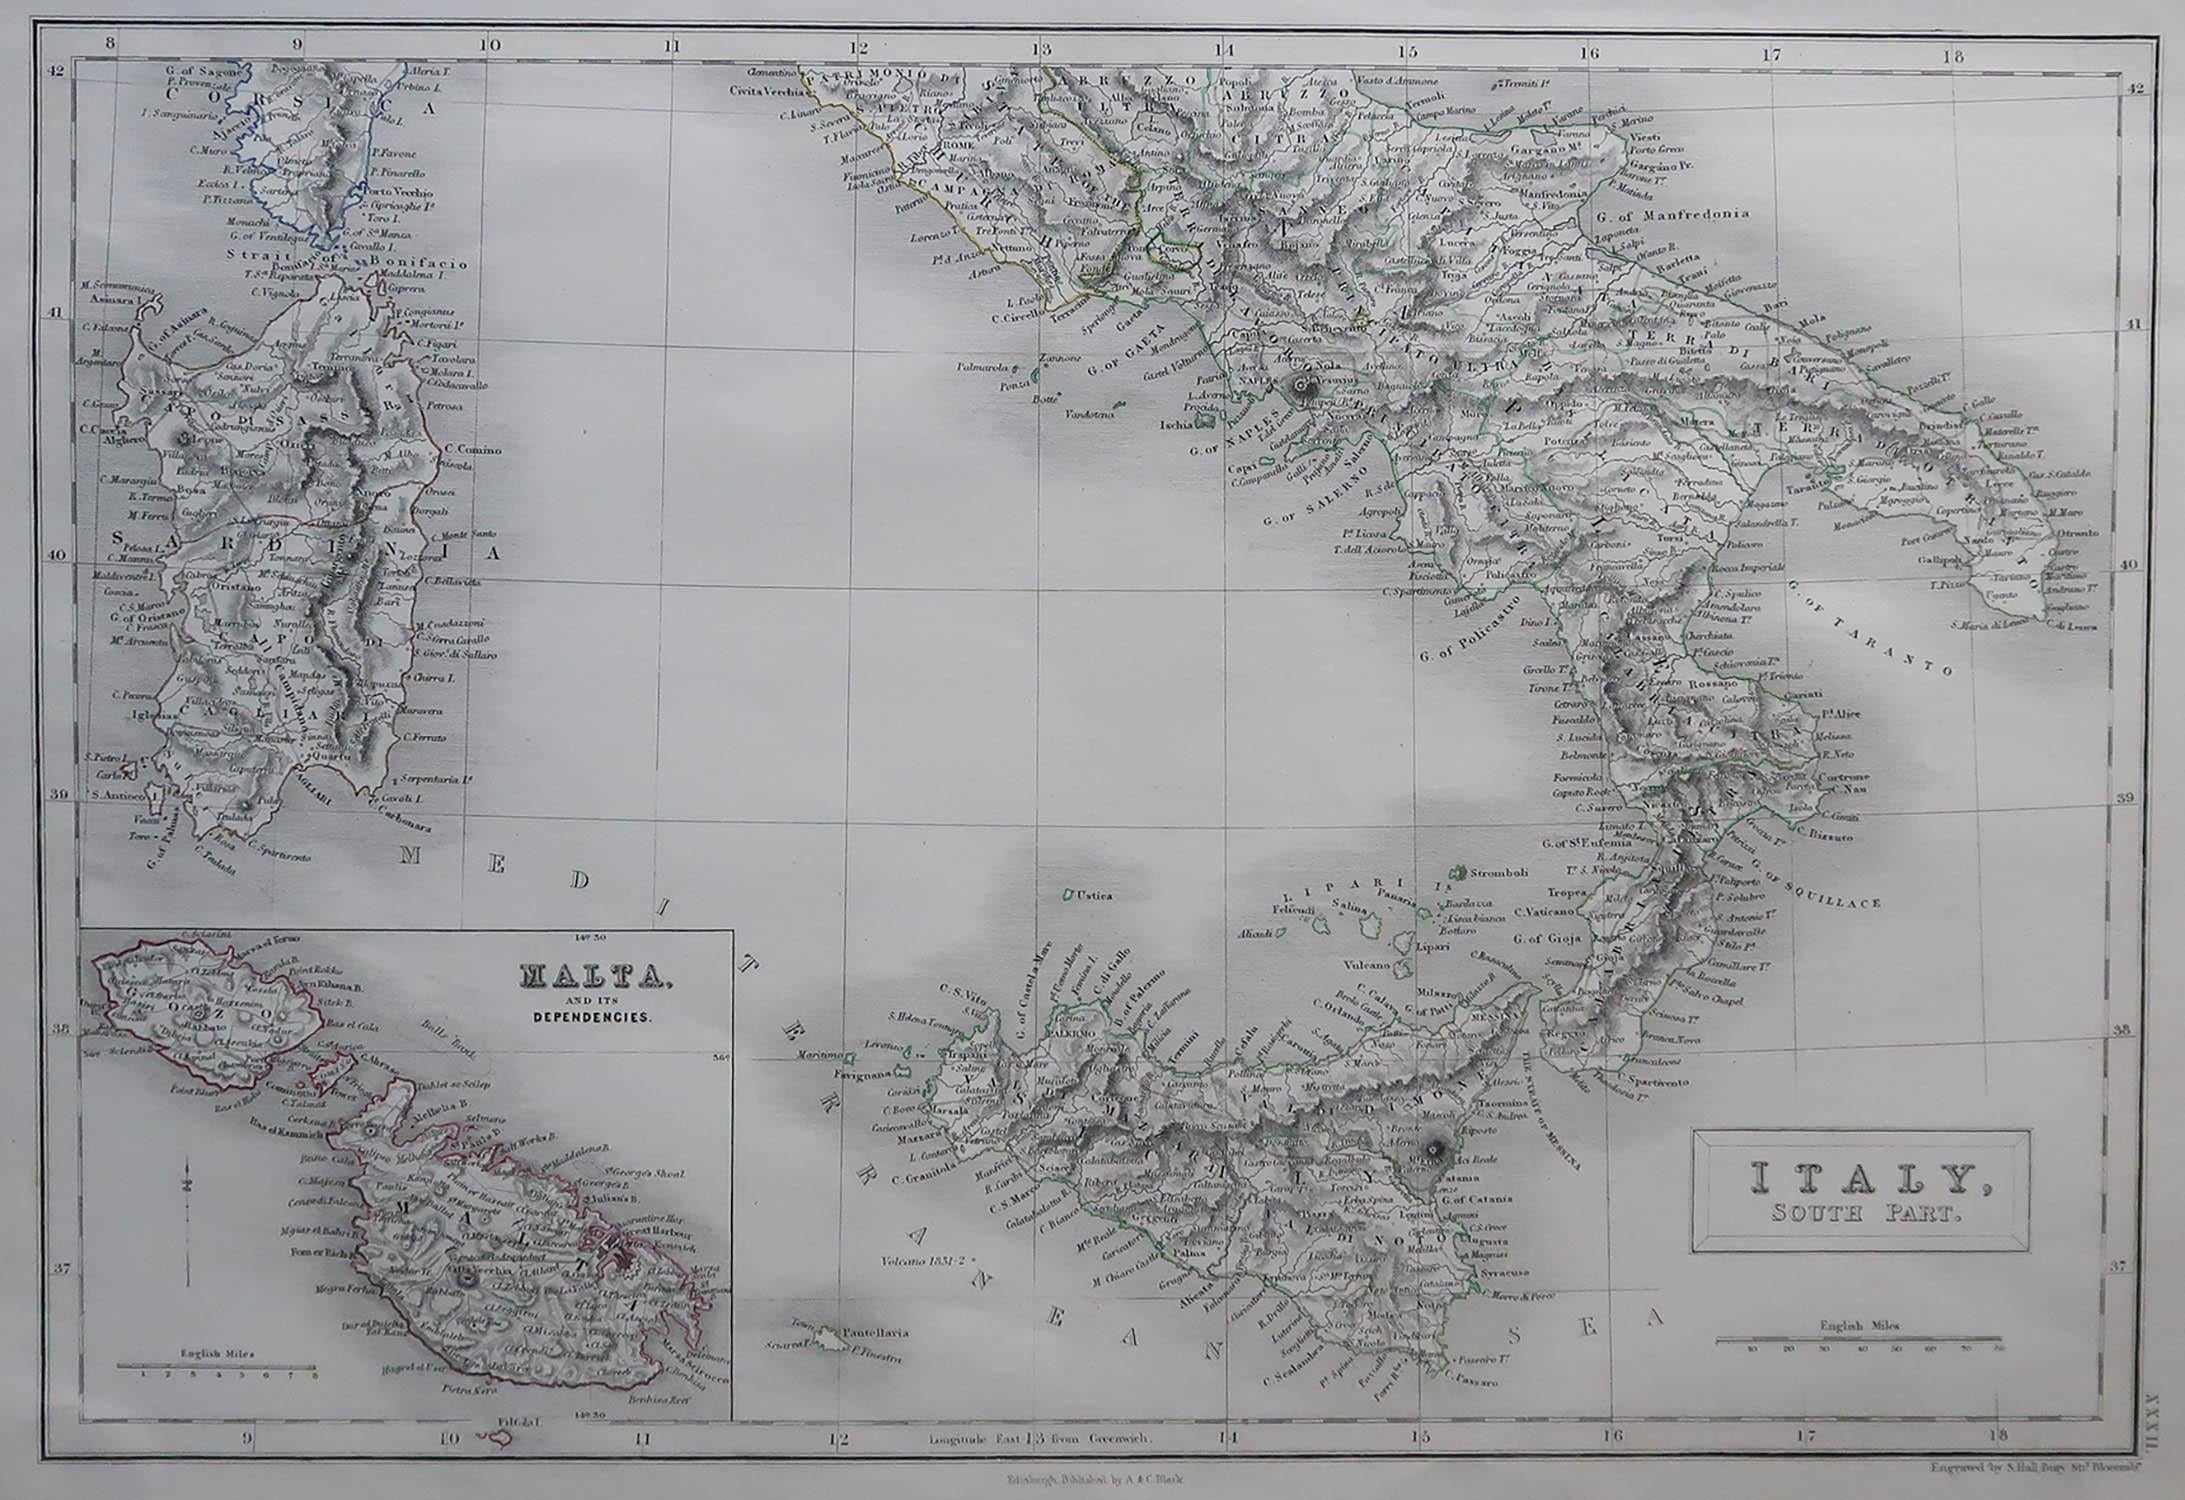 Great map of South Italy and Malta

Drawn by Sidney Hall

Steel engraving by G.Aikman

Original color outline

Published by A & C Black. 1847

Unframed

Free shipping.

